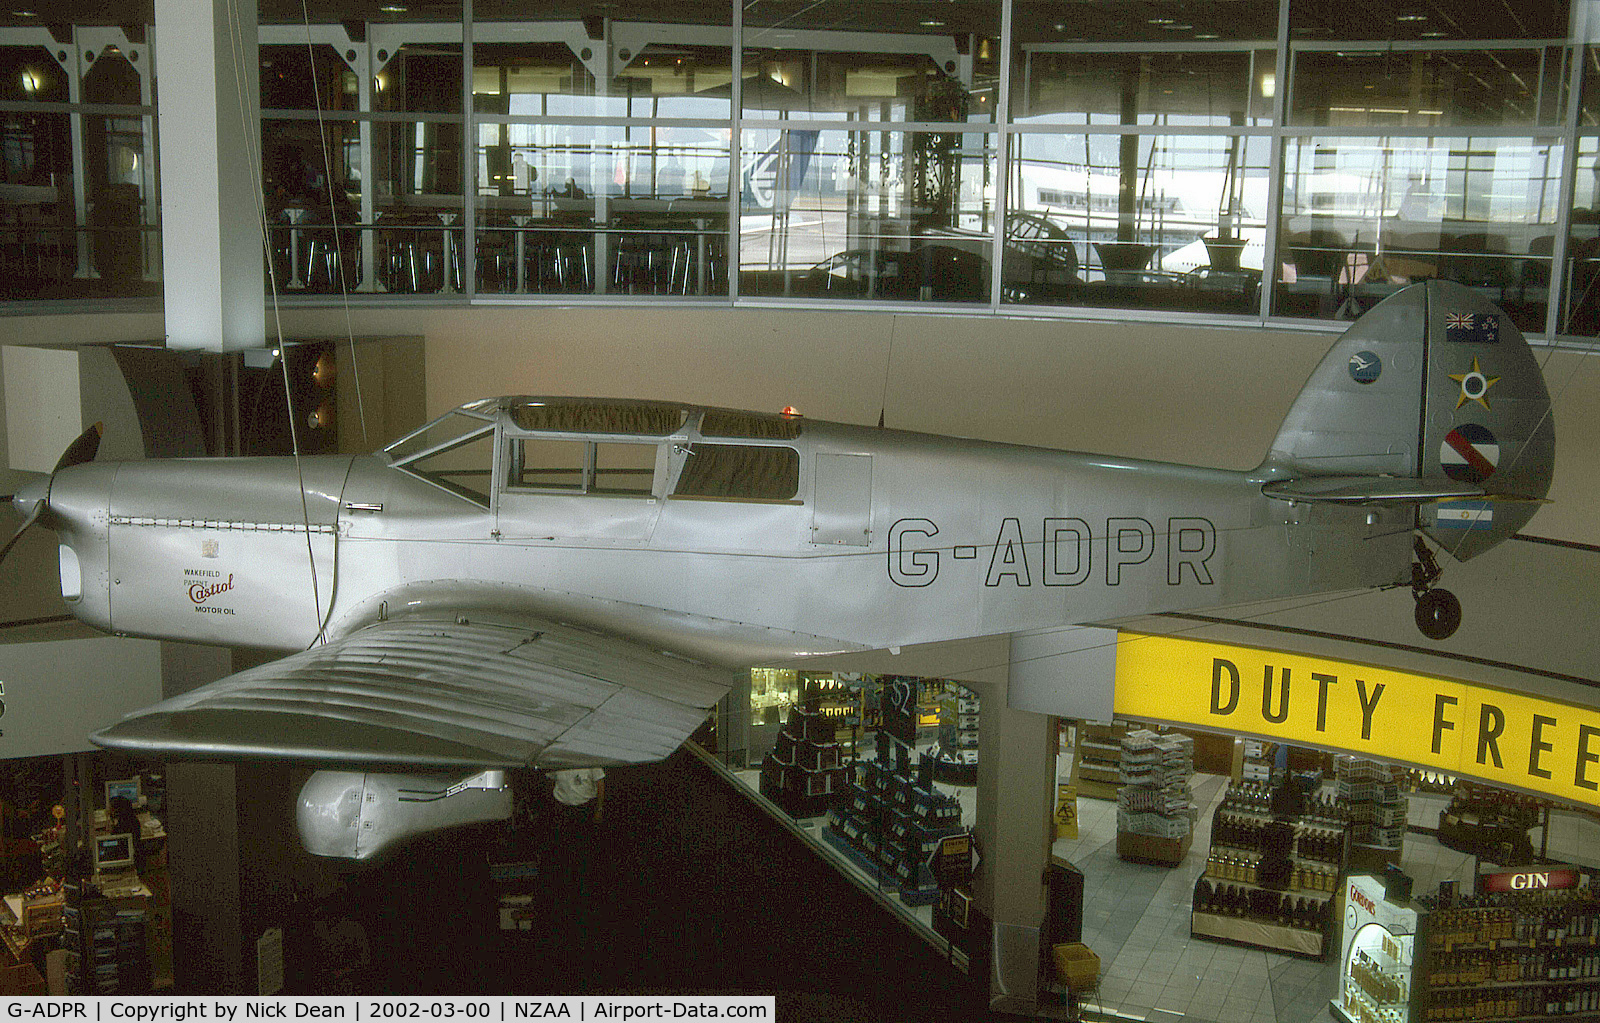 G-ADPR, 1935 Percival D-3 Gull Six (P-3) C/N D55, NZAA On display in the international departure lounge